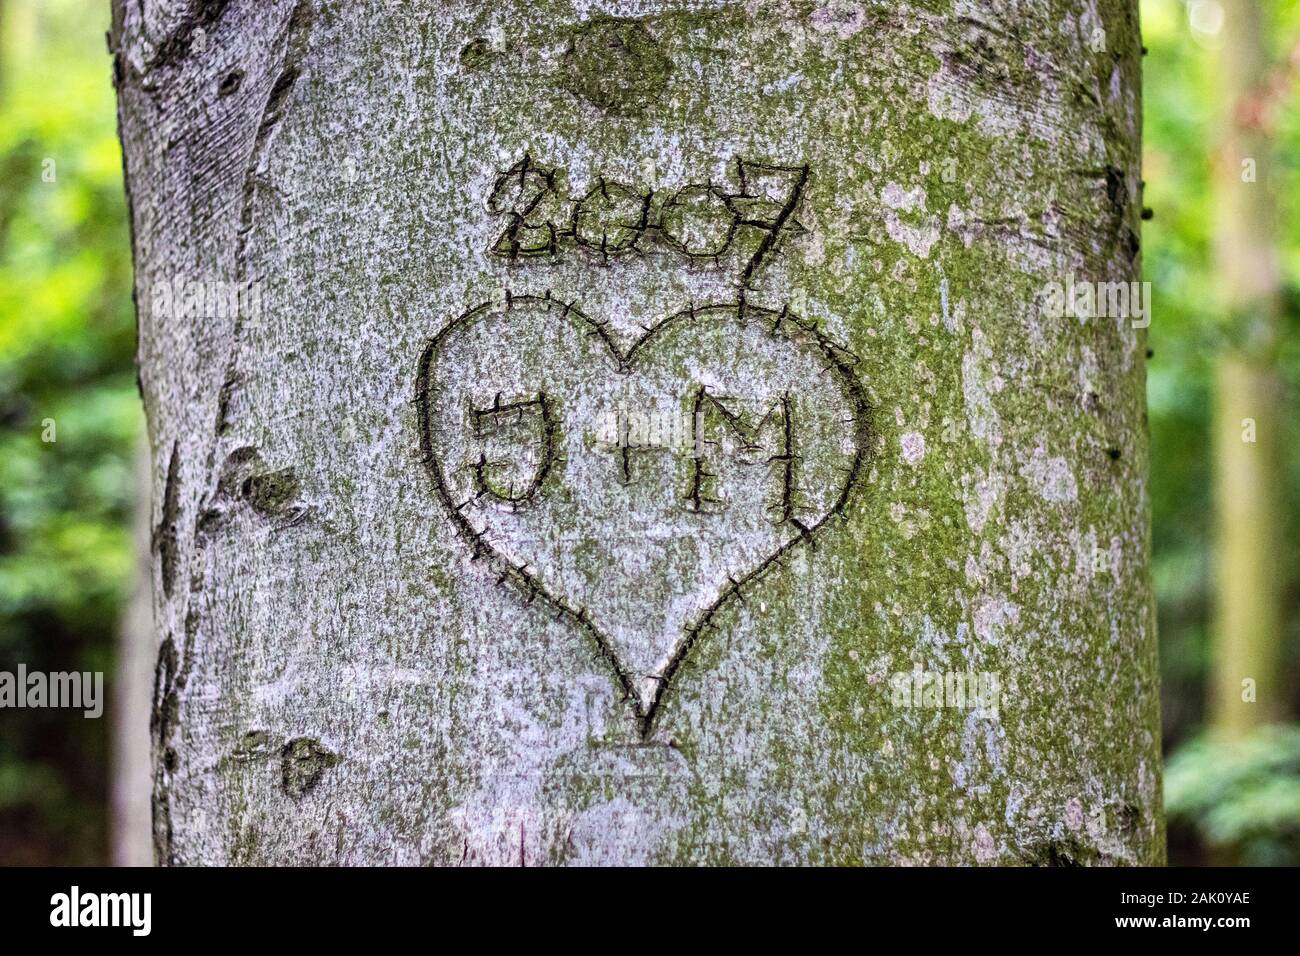 heart with monograms carved in the bark of a tree trunk Stock Photo